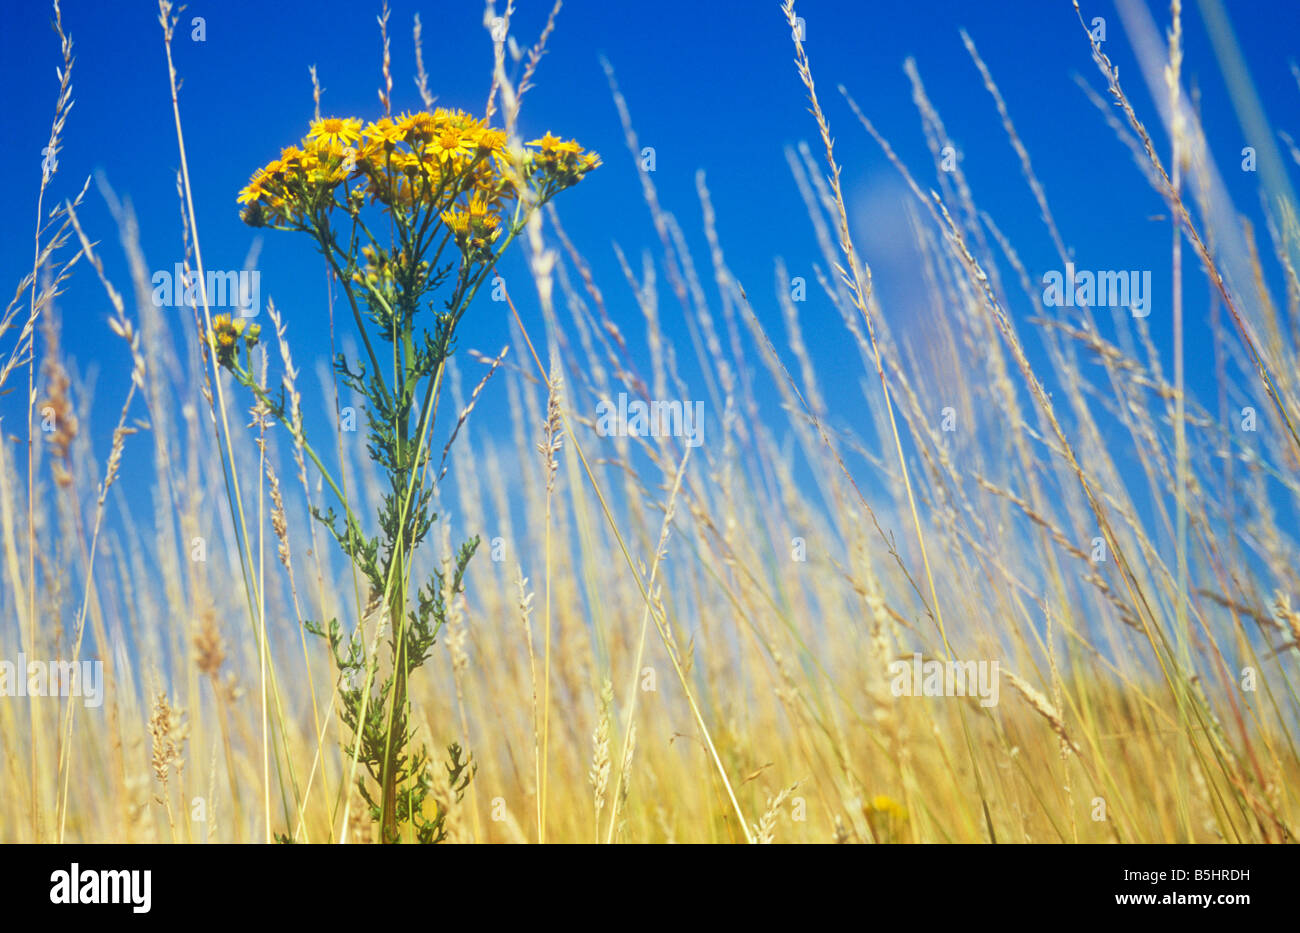 Close up at ground level of stem and yellow flowers of Common ragwort surrounded by dry Red fescue grass against blue sky Stock Photo